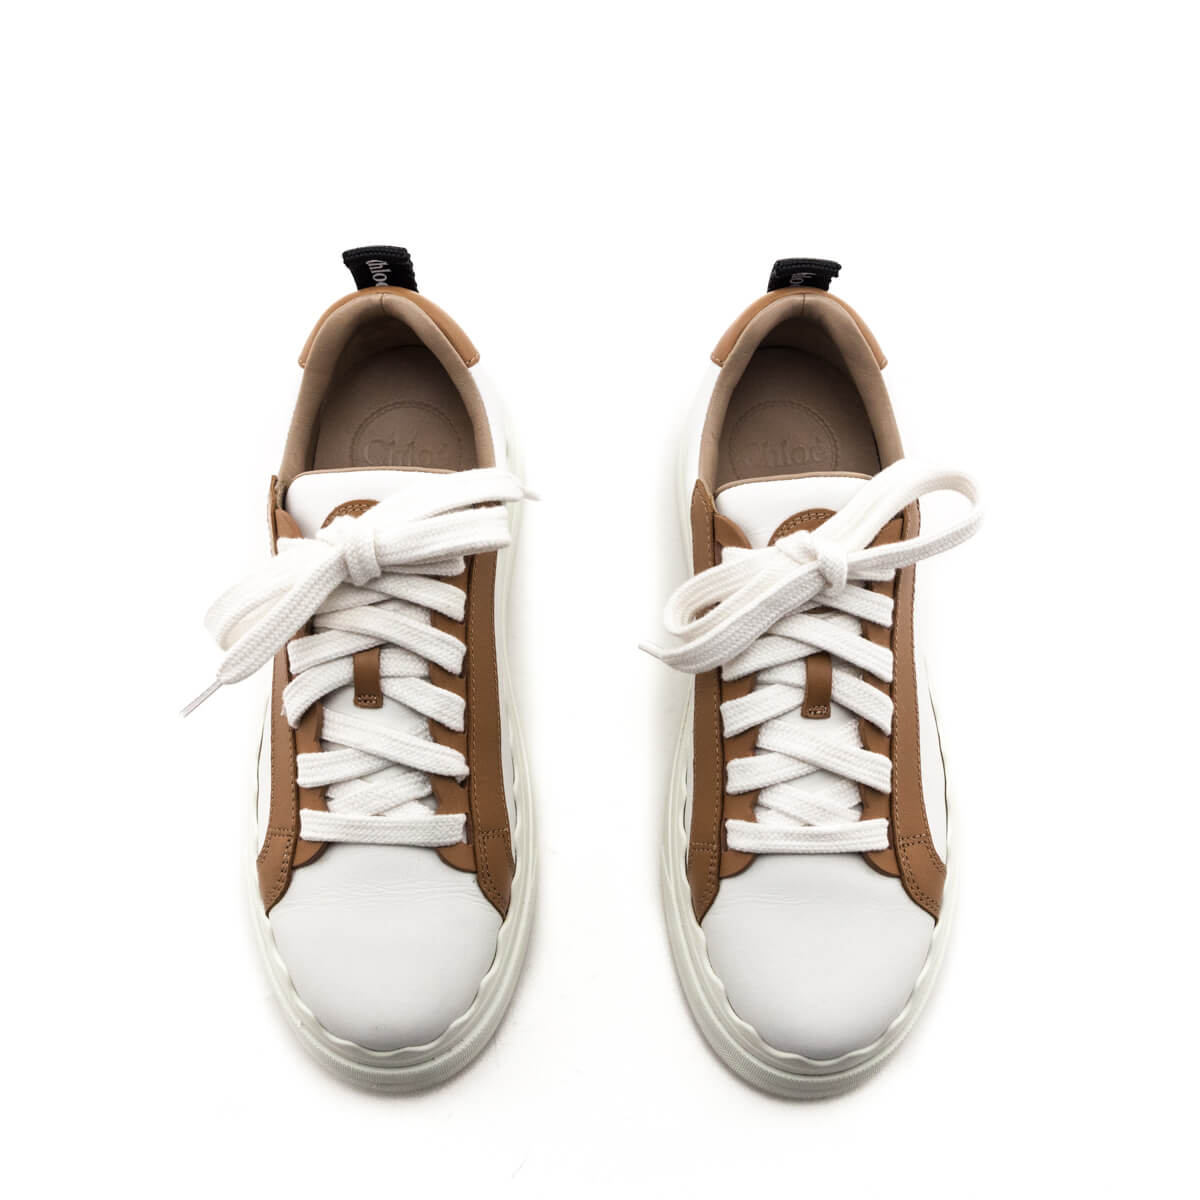 Chloe White & Tan Leather Low Top Lauren Sneakers Size US 6 | US 36 - Love that Bag etc - Preowned Authentic Designer Handbags & Preloved Fashions